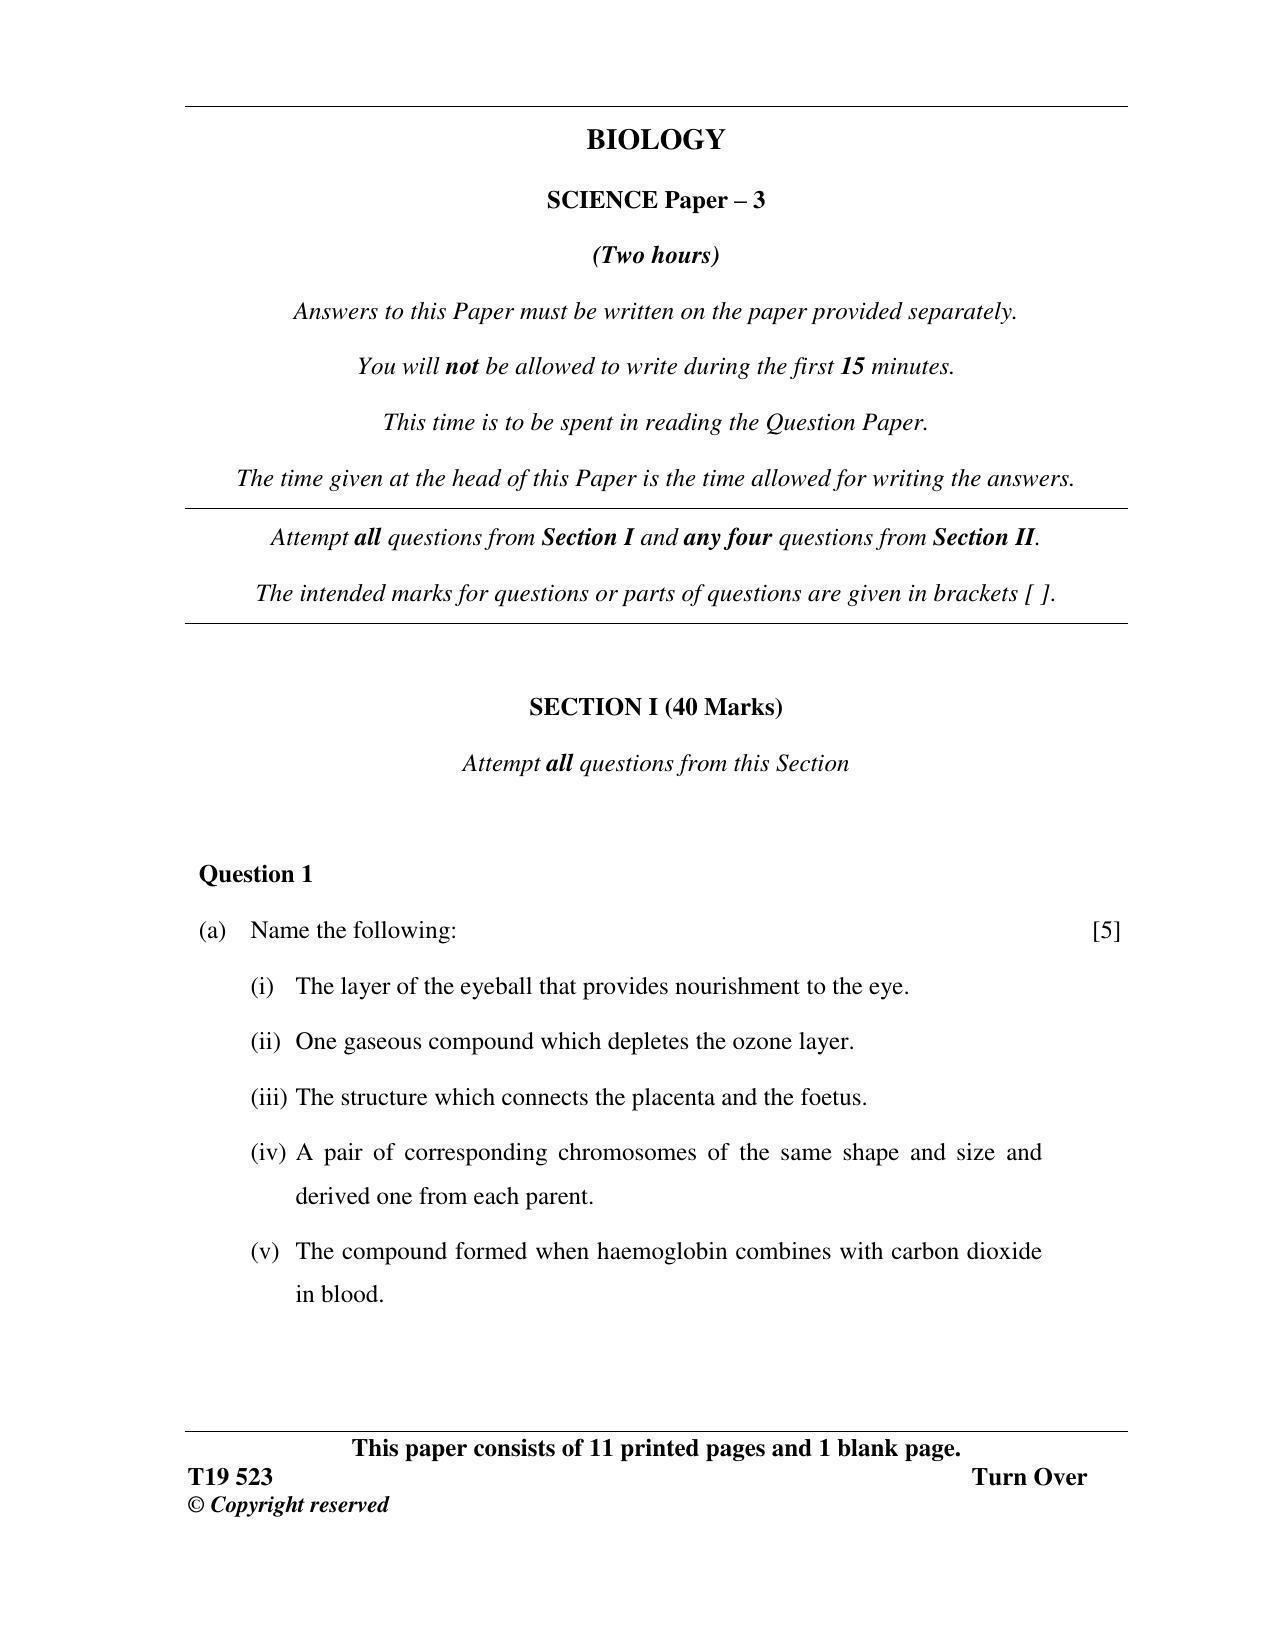 ICSE Class 10 Science Paper 3 (Biology) 2019 Question Paper - Page 1